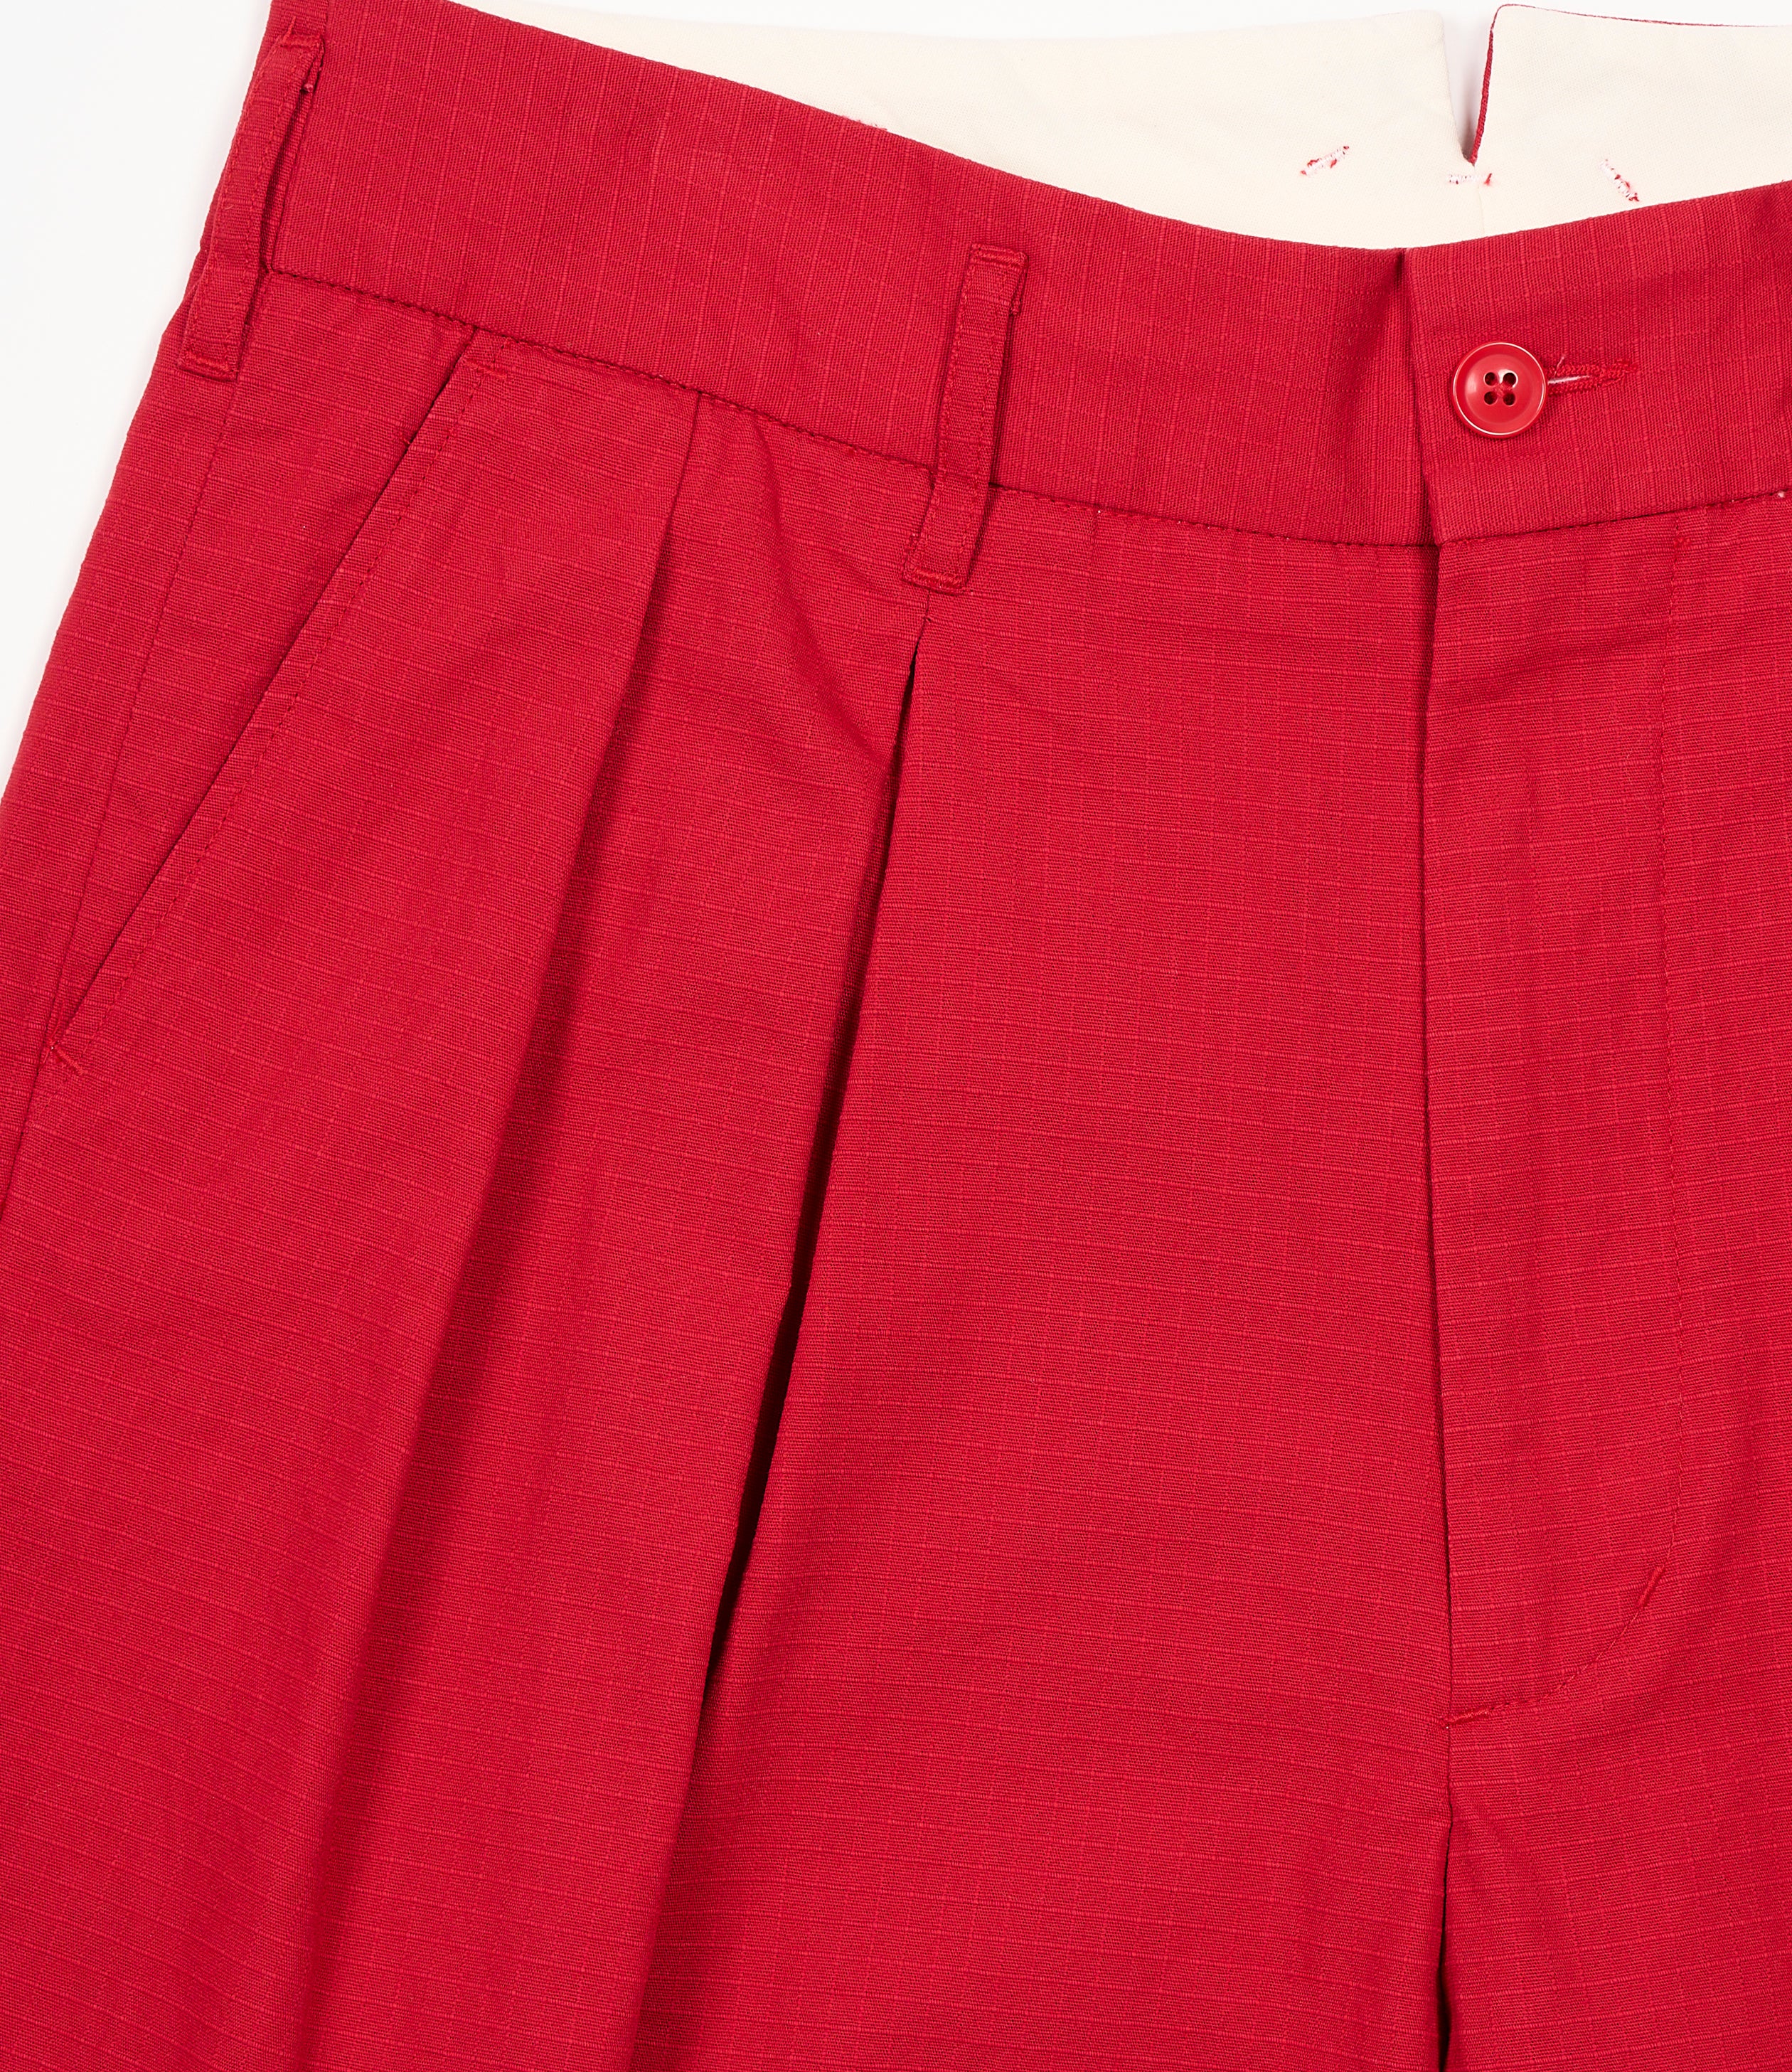 Nepenthes Special - Bontan Pant - Red Cotton Ripstop